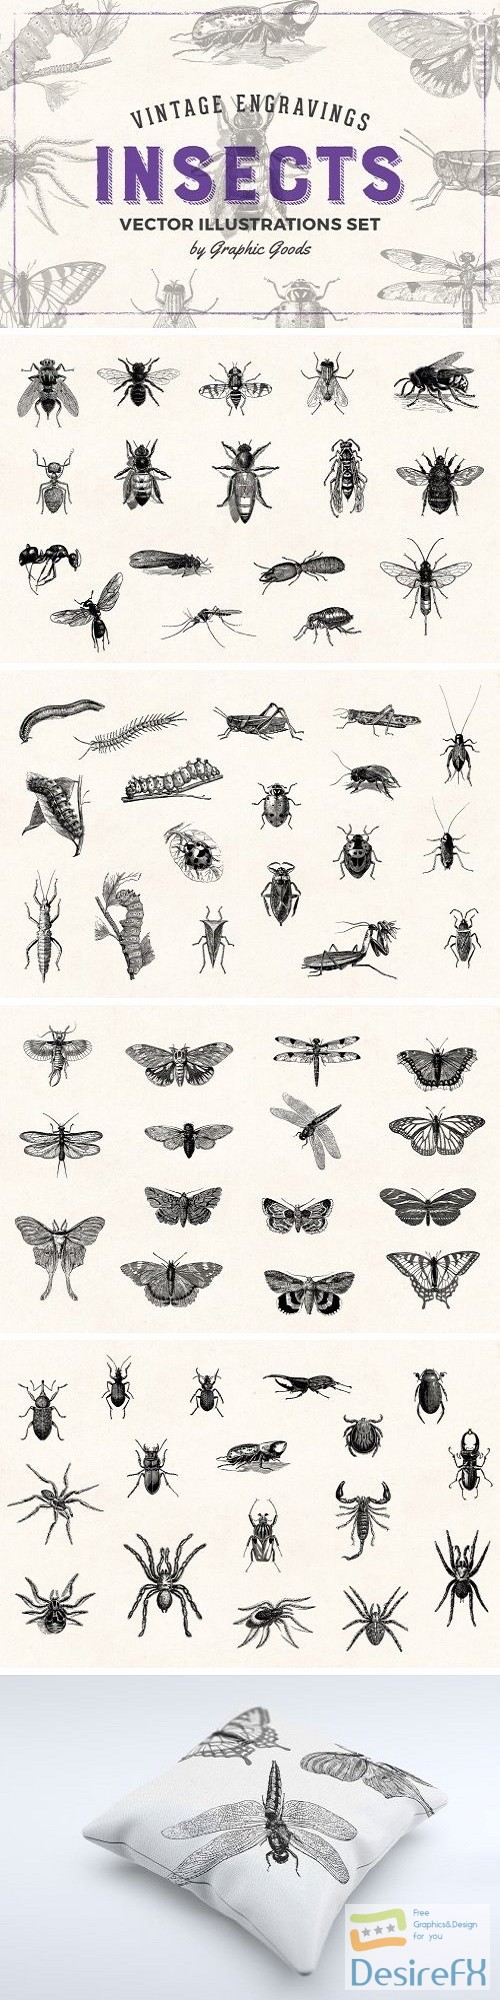 Insects - Vintage Illustrations - 1452979